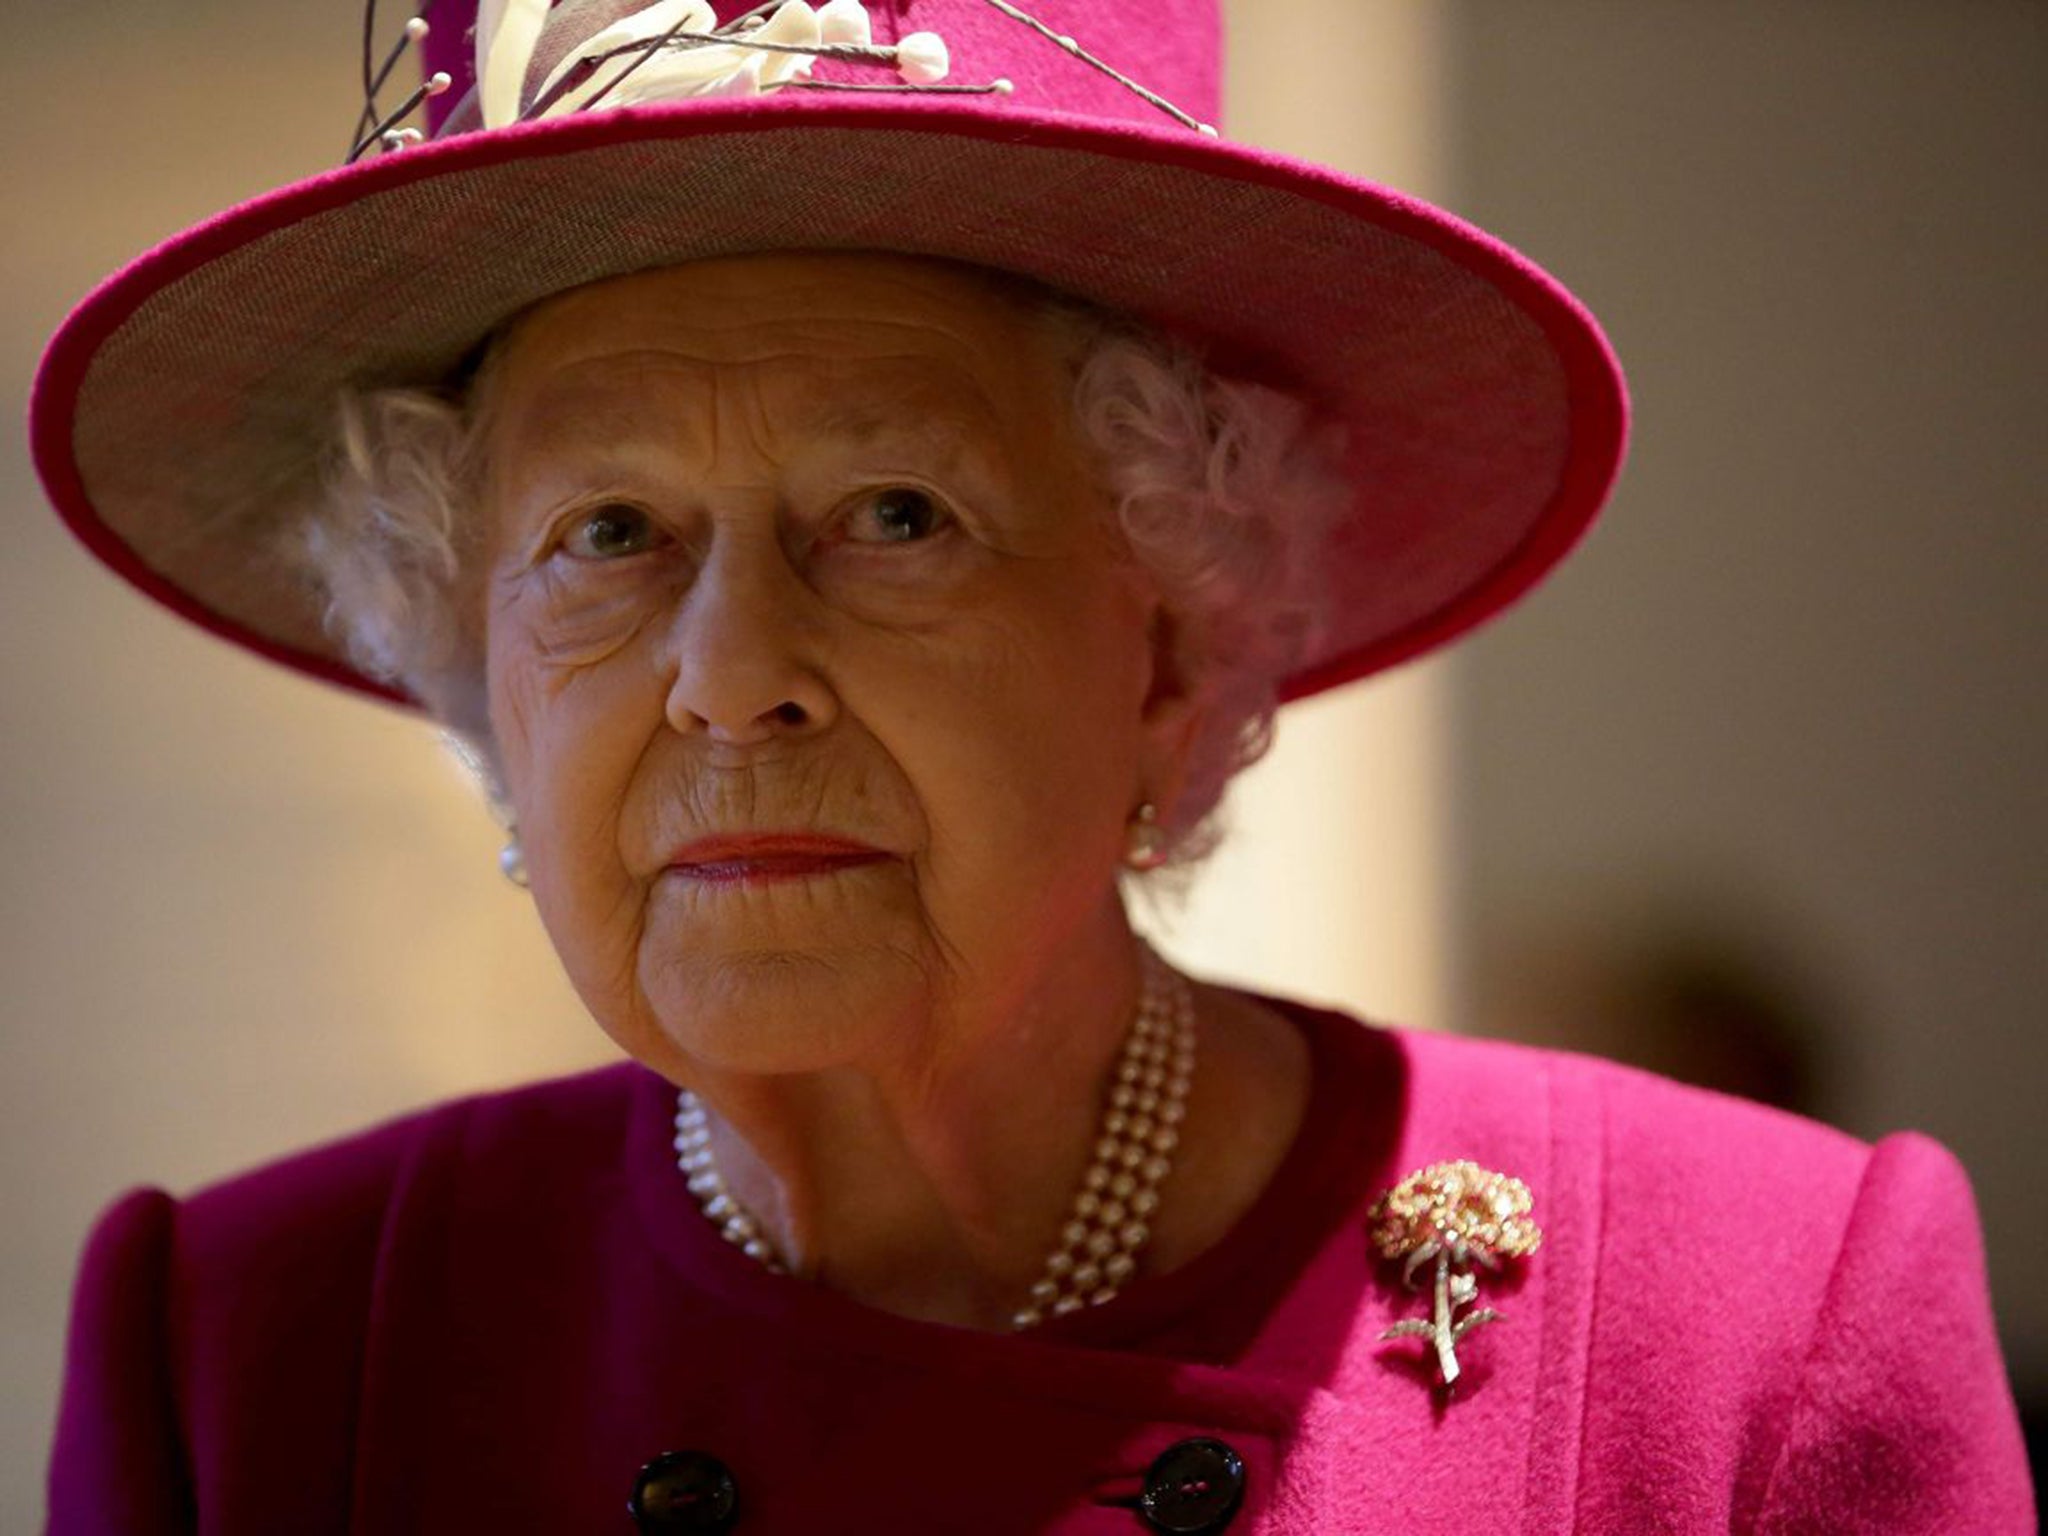 The documents also traced a small portion of the Queen’s investments – £3,208 – to the rent-to-buy firm BrightHouse